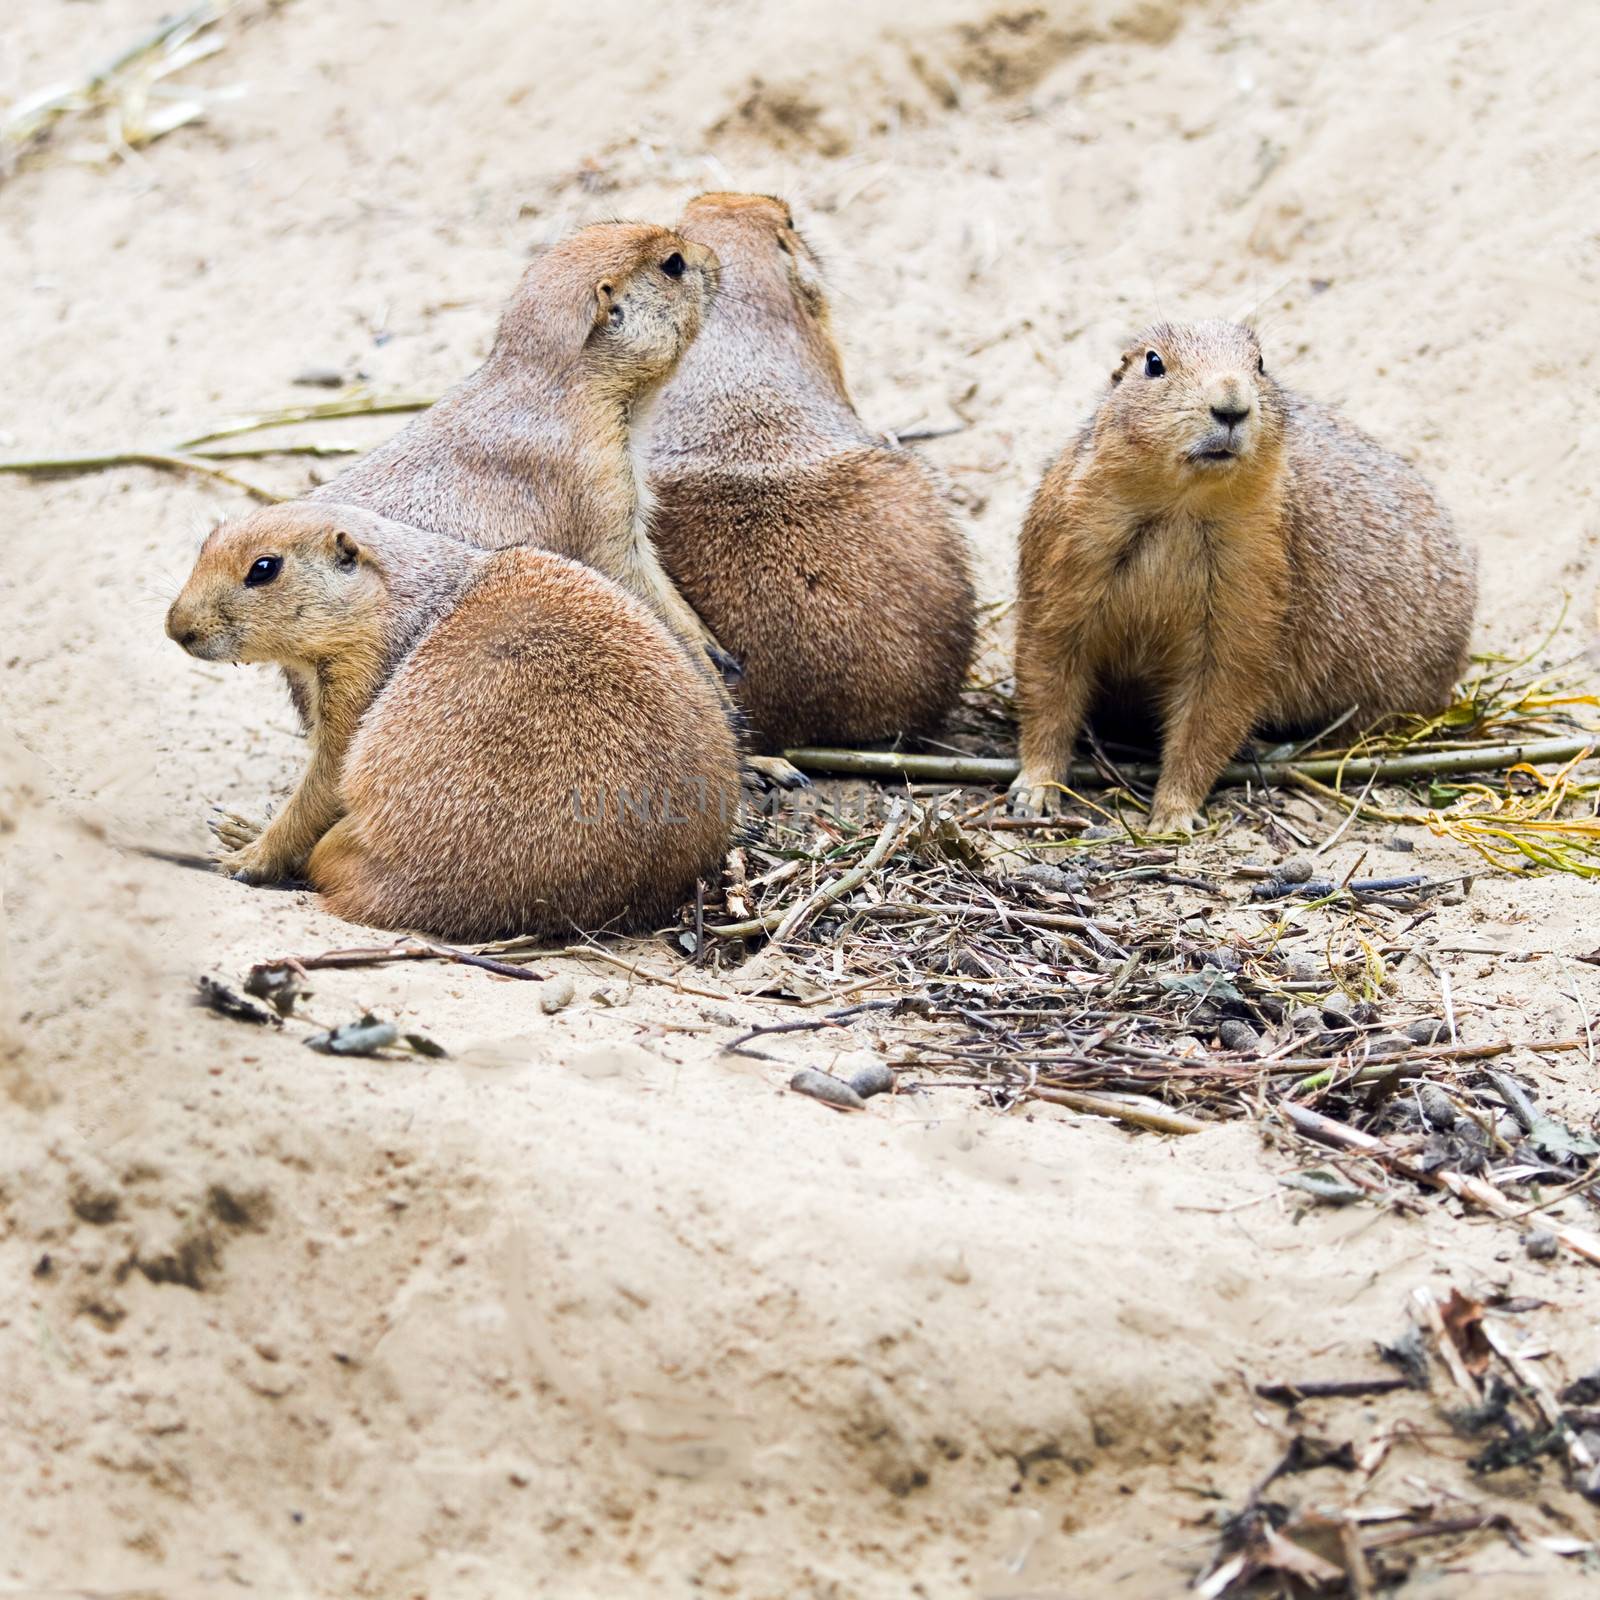 Four prairie dogs sitting together and watching - square